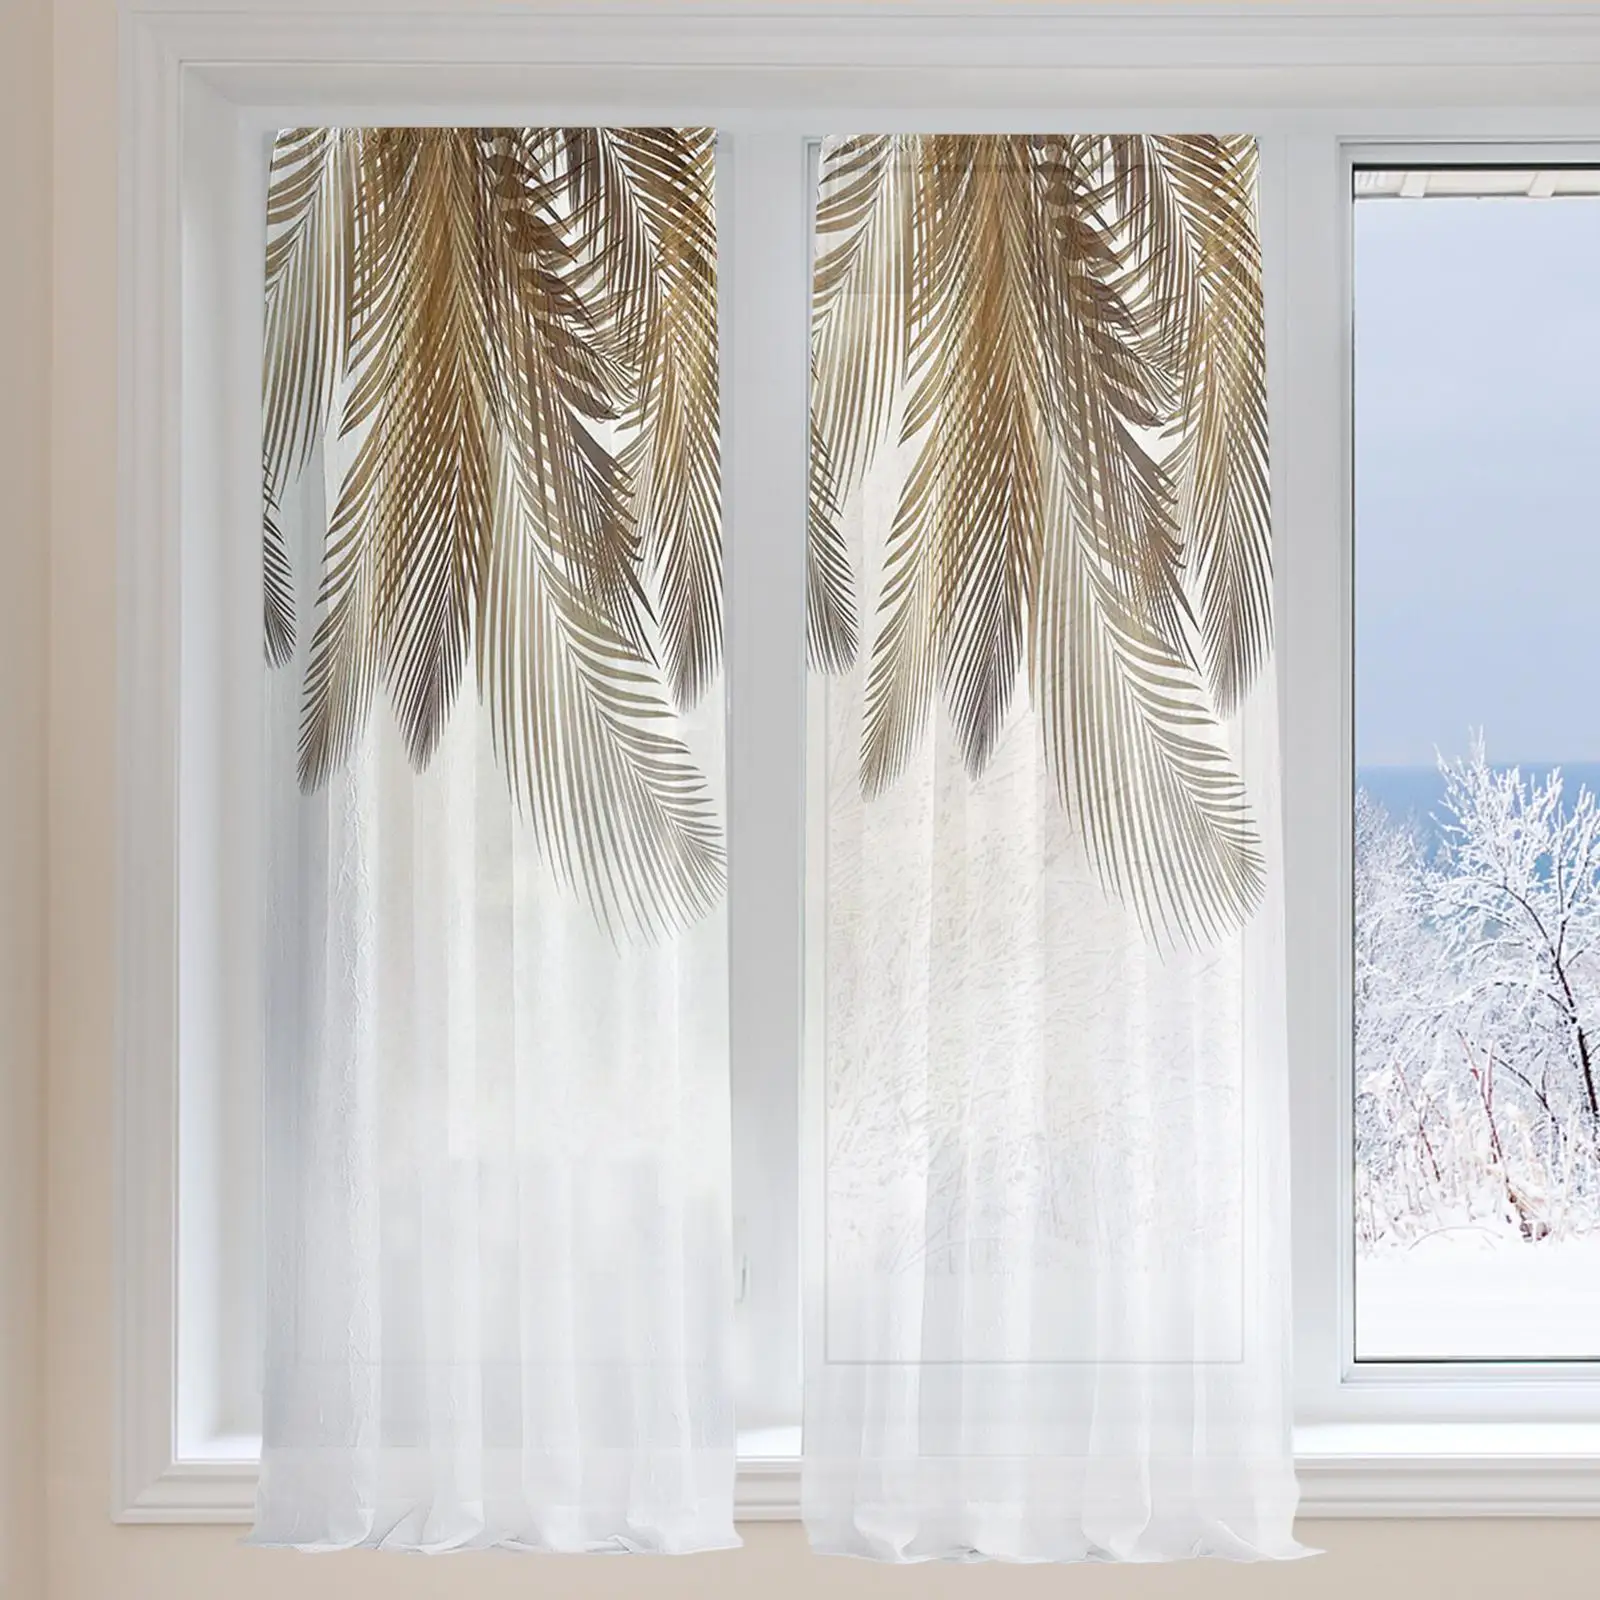 Sheer Curtains Semitransparent Draperies for Bedroom Living Room Kitchen